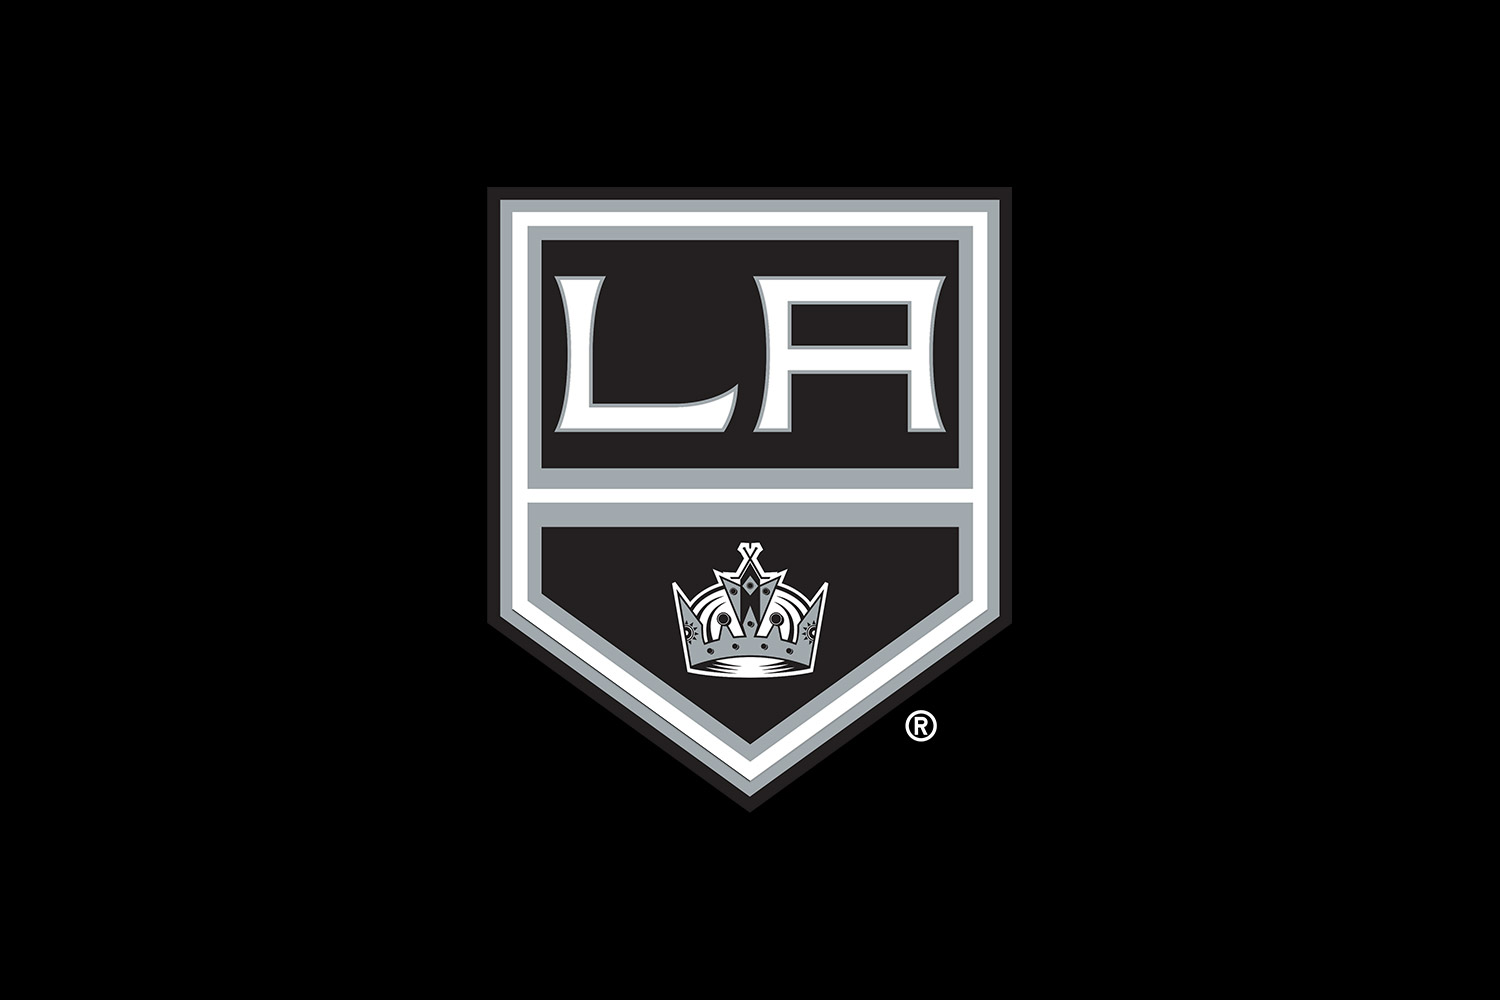 Following Muzzin trade, Kings President Luc Robitaille writes